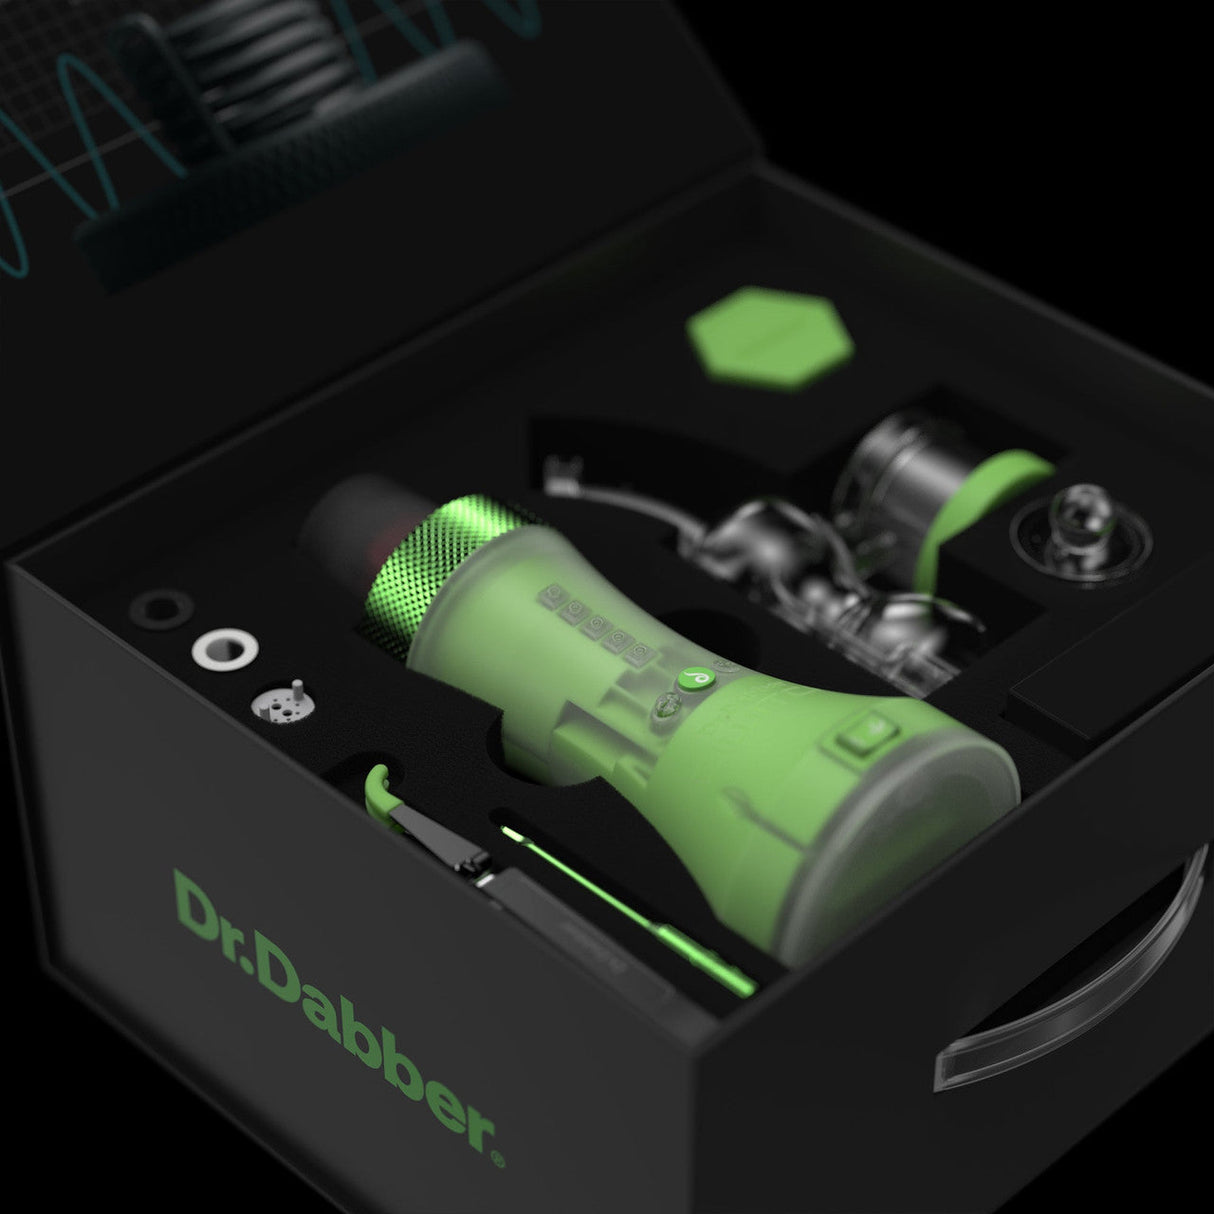 Dr Dabber Switch vaporizer in green, glow in the dark edition, displayed in box with accessories